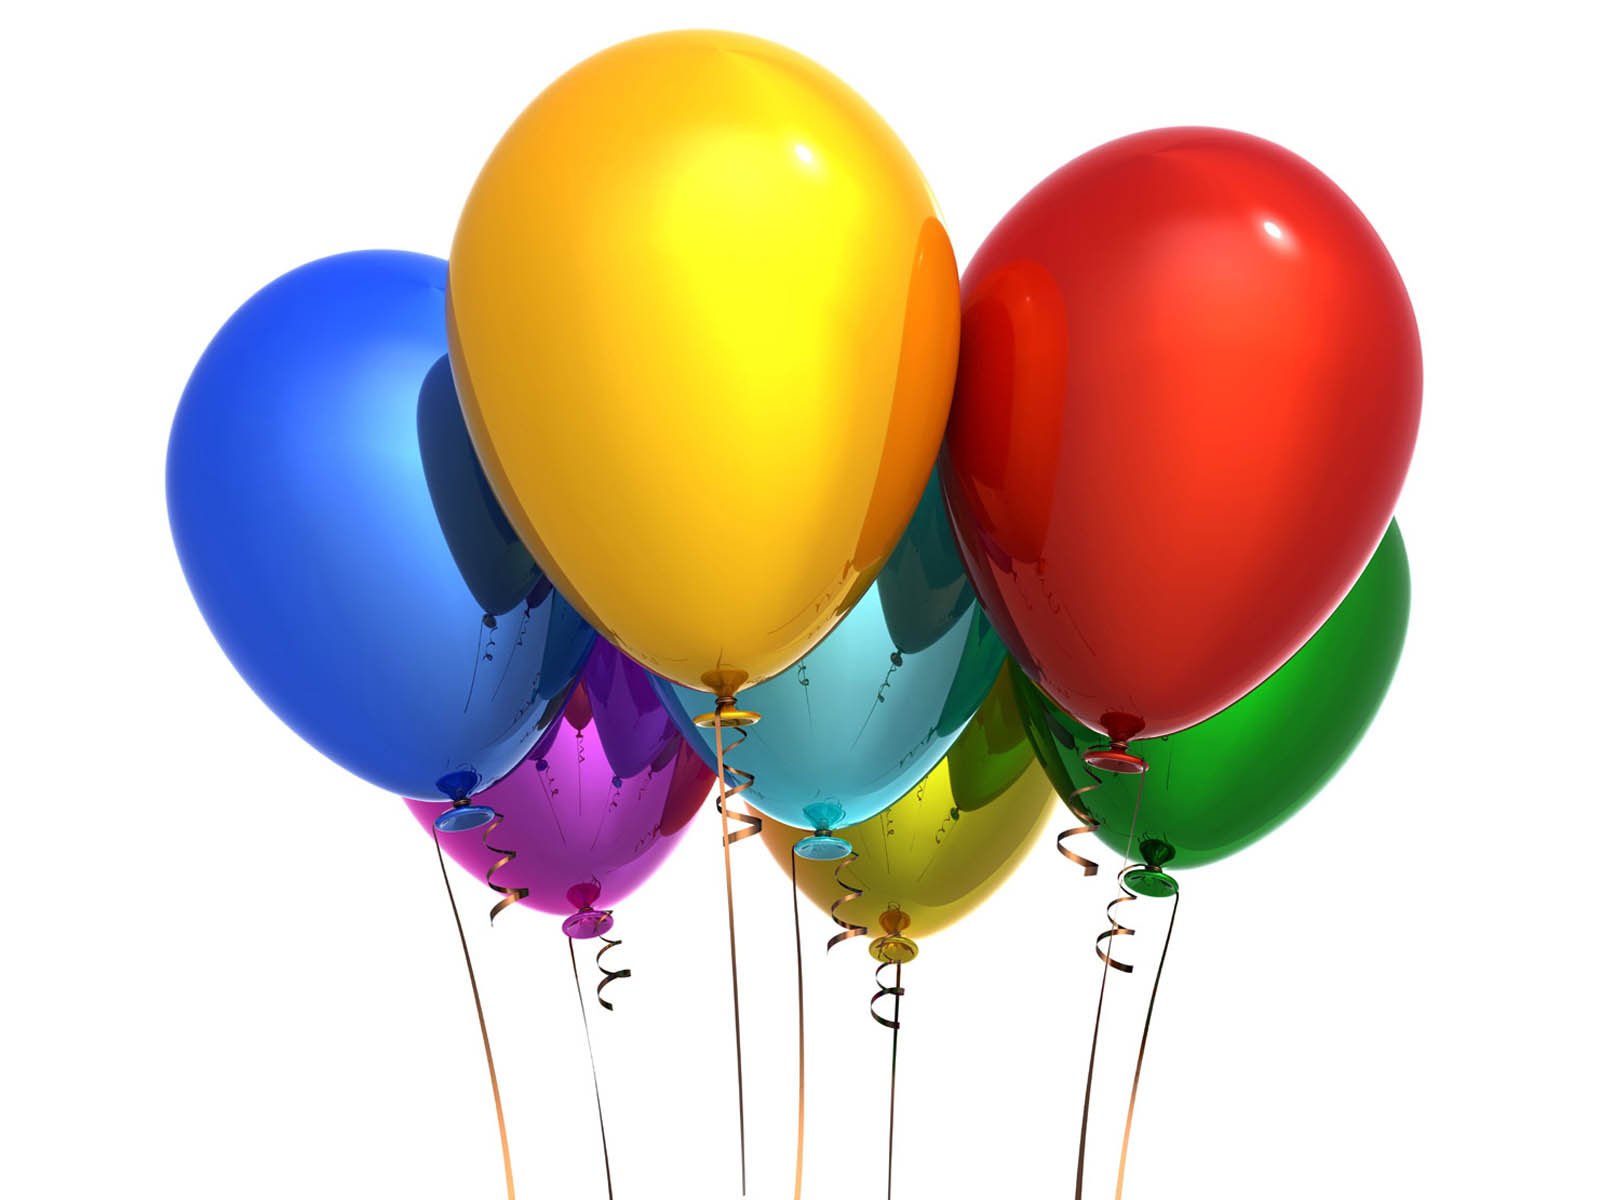 Tag Balloons Wallpapers Images Photos Pictures and Backgrounds for